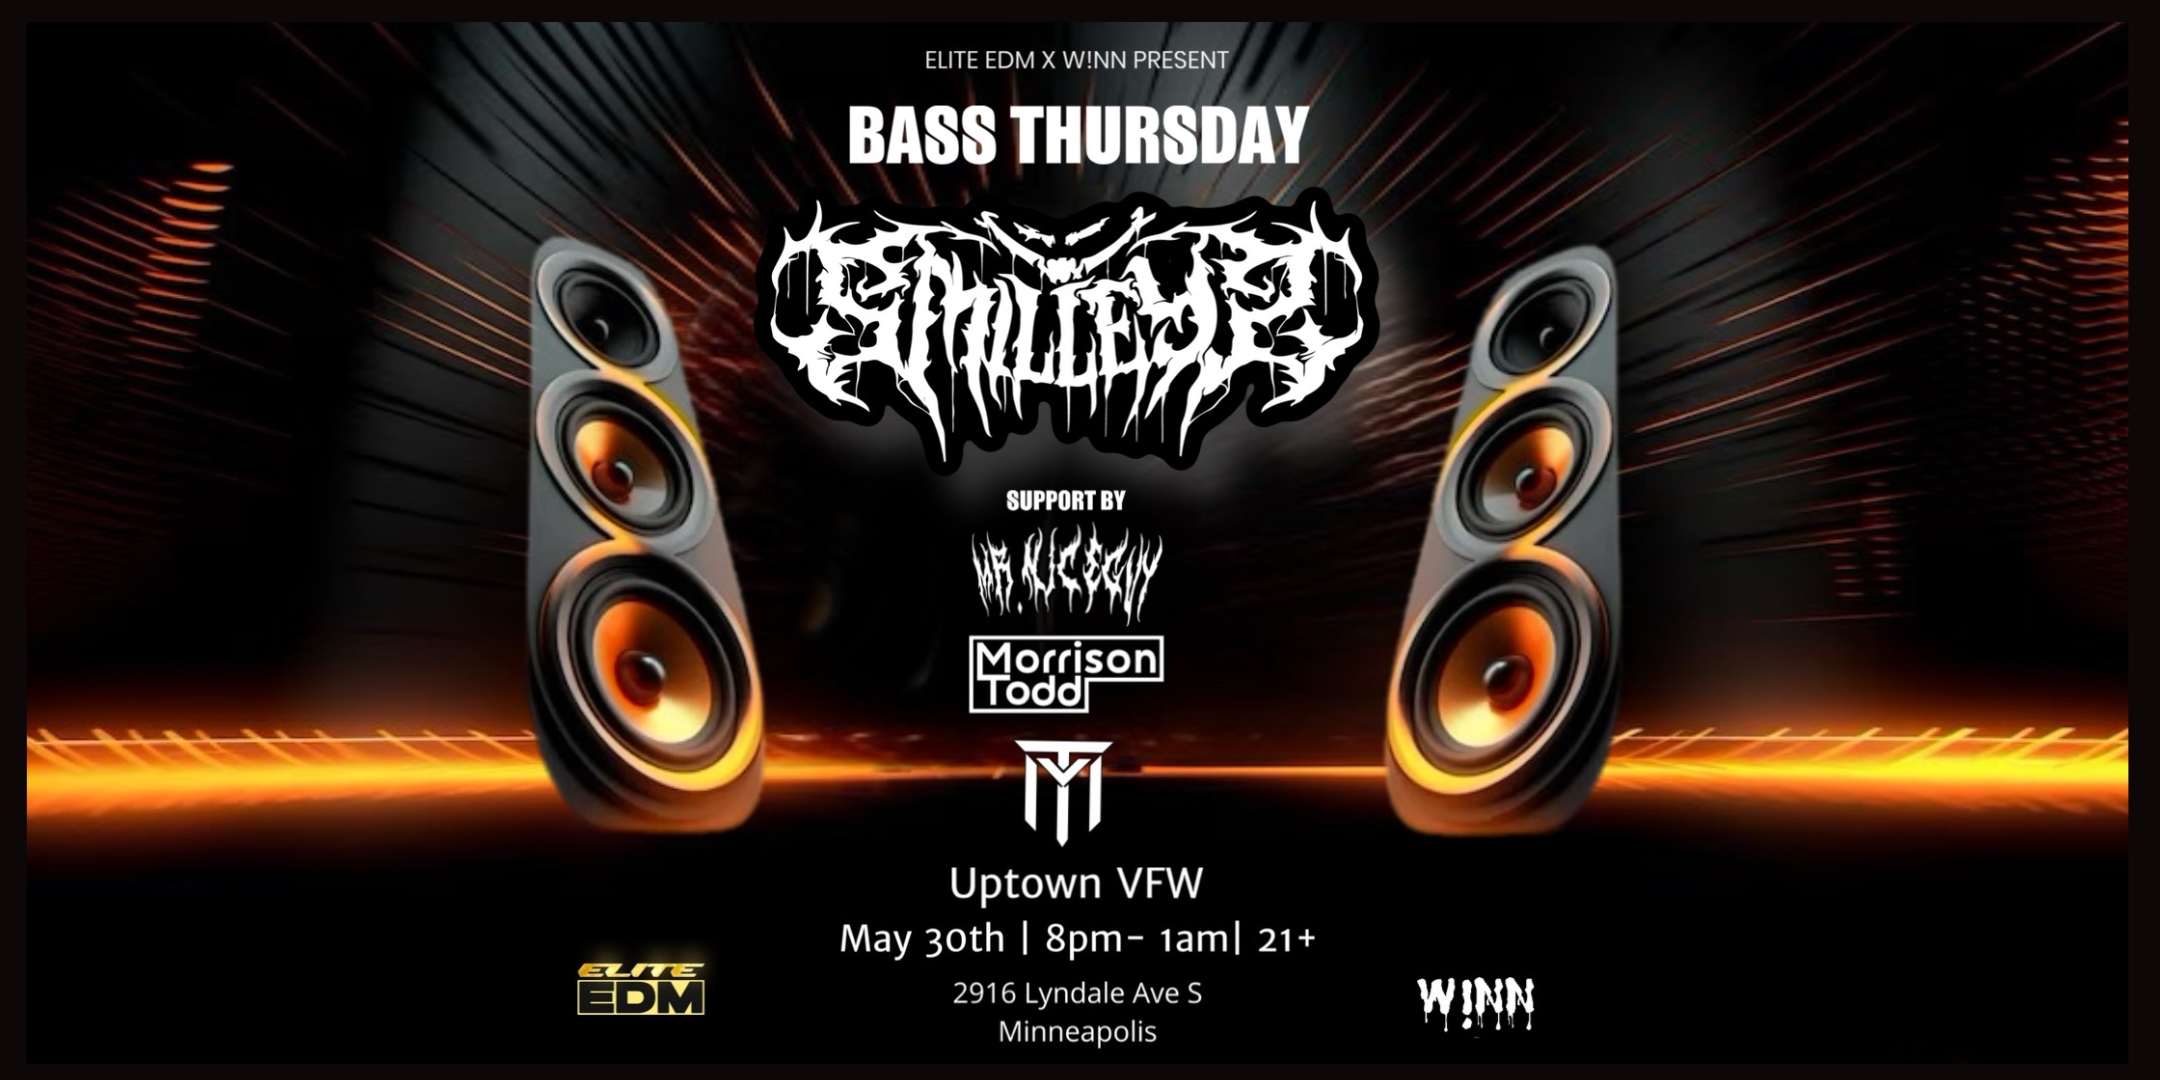 ELITE EDM x W!NN Presents: Smilleyz (Minneapolis debut) Support by: Mr.NiceGuy, Morrison Todd, & Miguel Tobar Thursday May 30 James Ballentine “Uptown” VFW Post 246 Doors 8:00pm :: Music 8pm-1am :: 21+ GA $10 ADV / $15 DOS Tickets On Sale Now